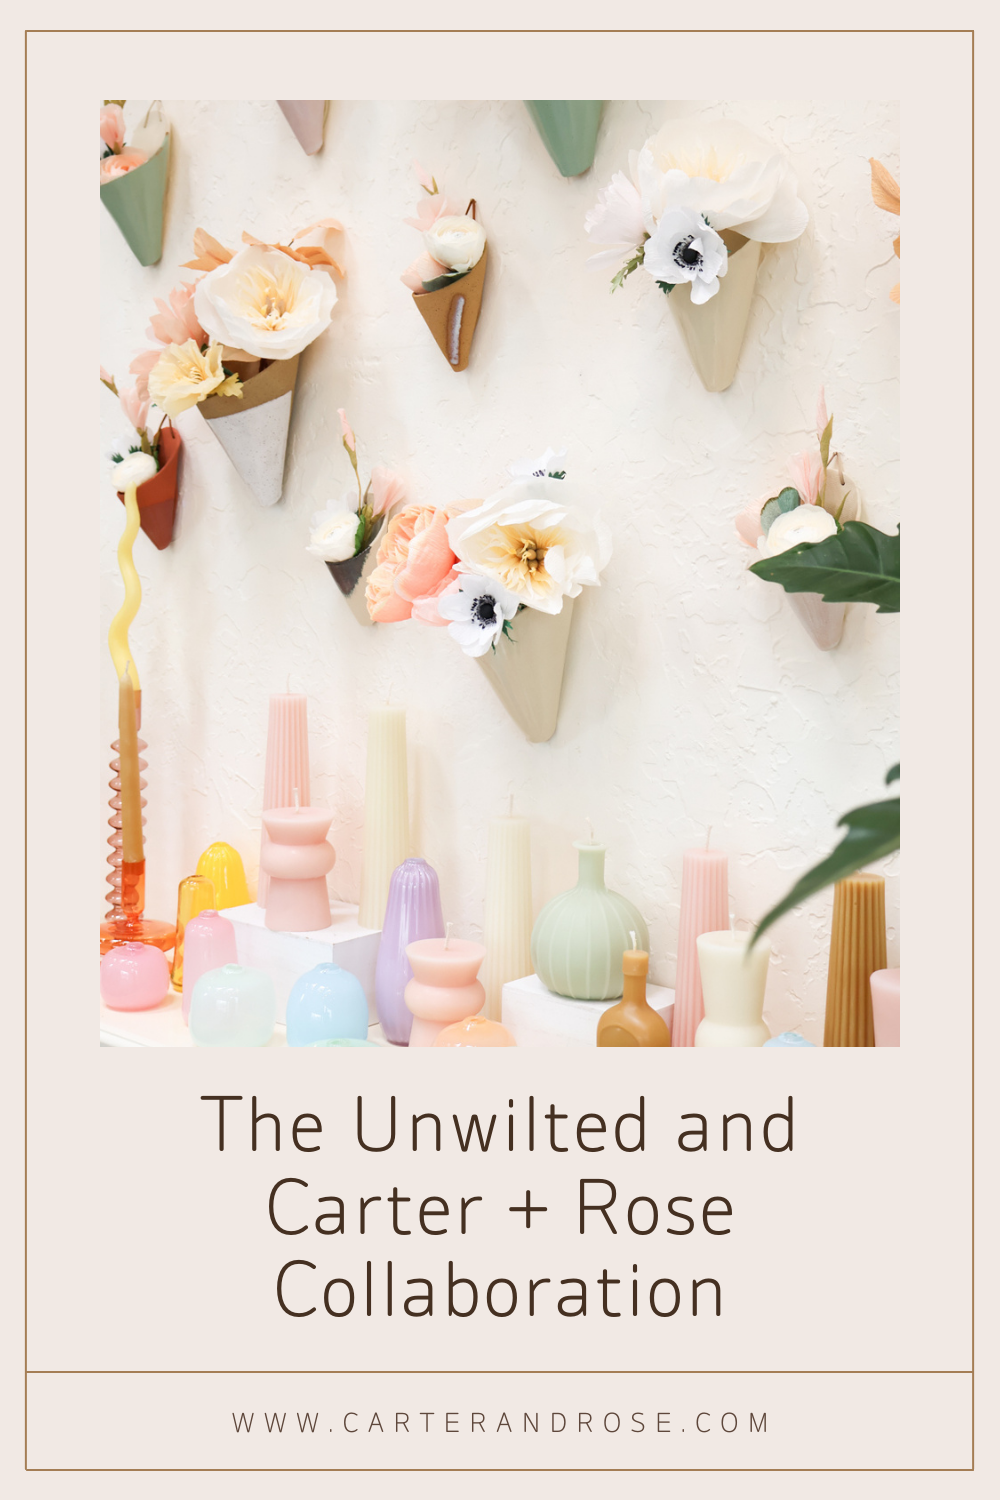 The Unwilted and Carter + Rose Collaboration